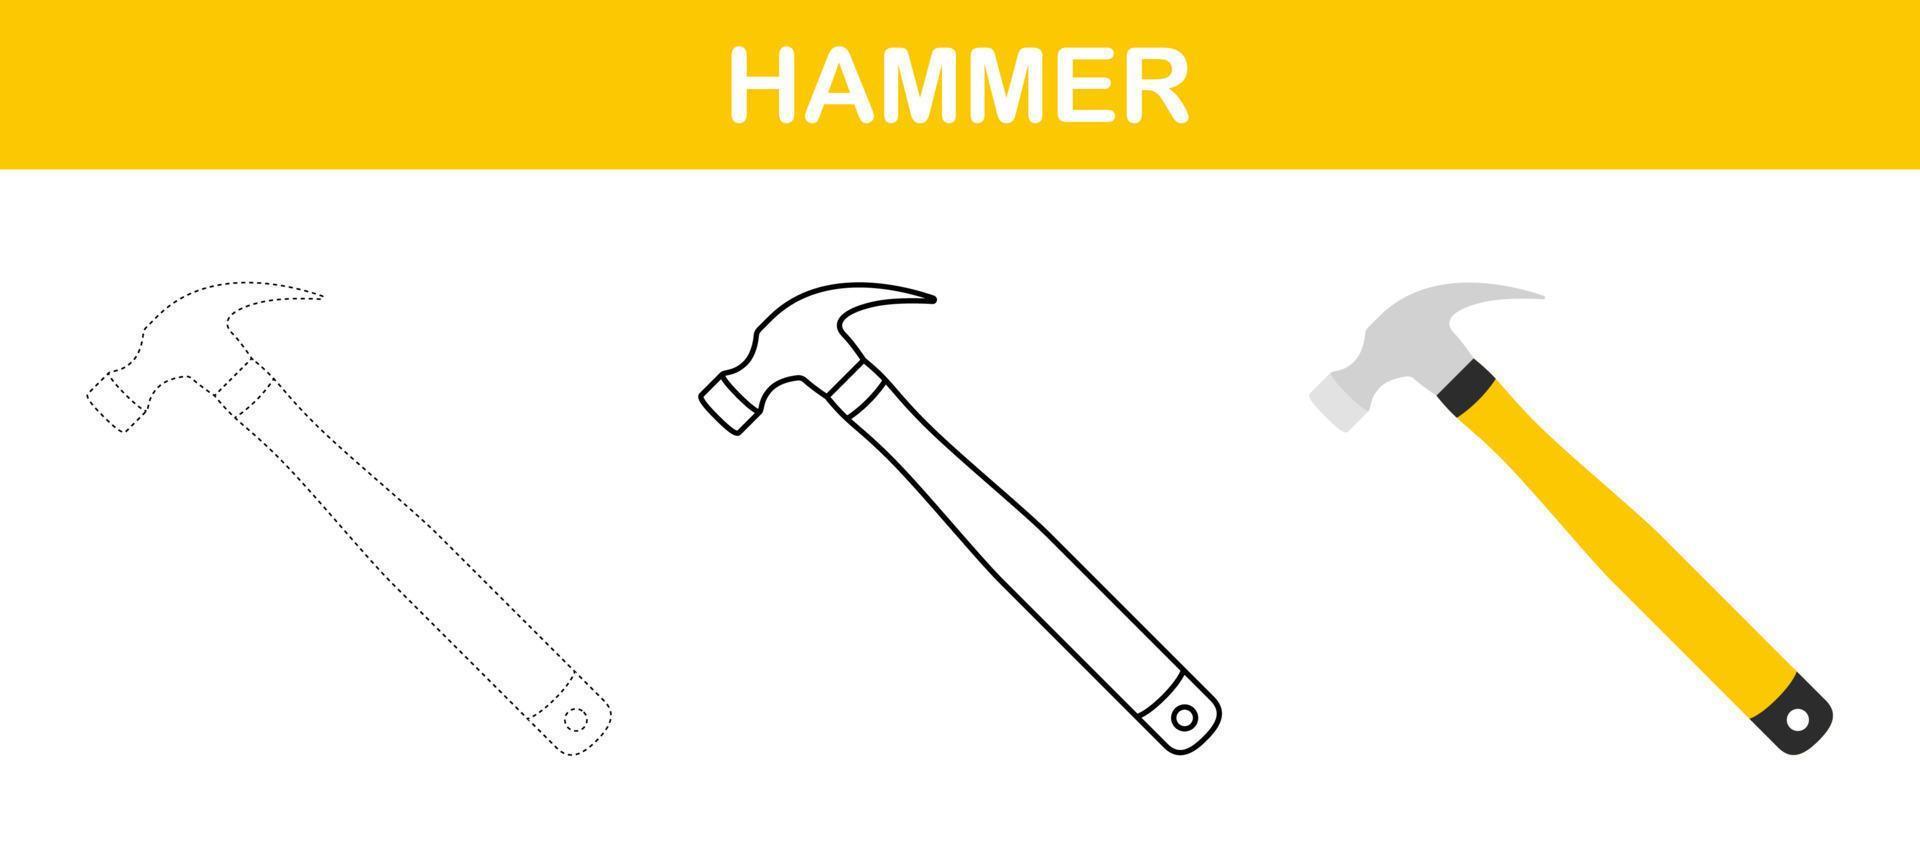 Hammer tracing and coloring worksheet for kids vector